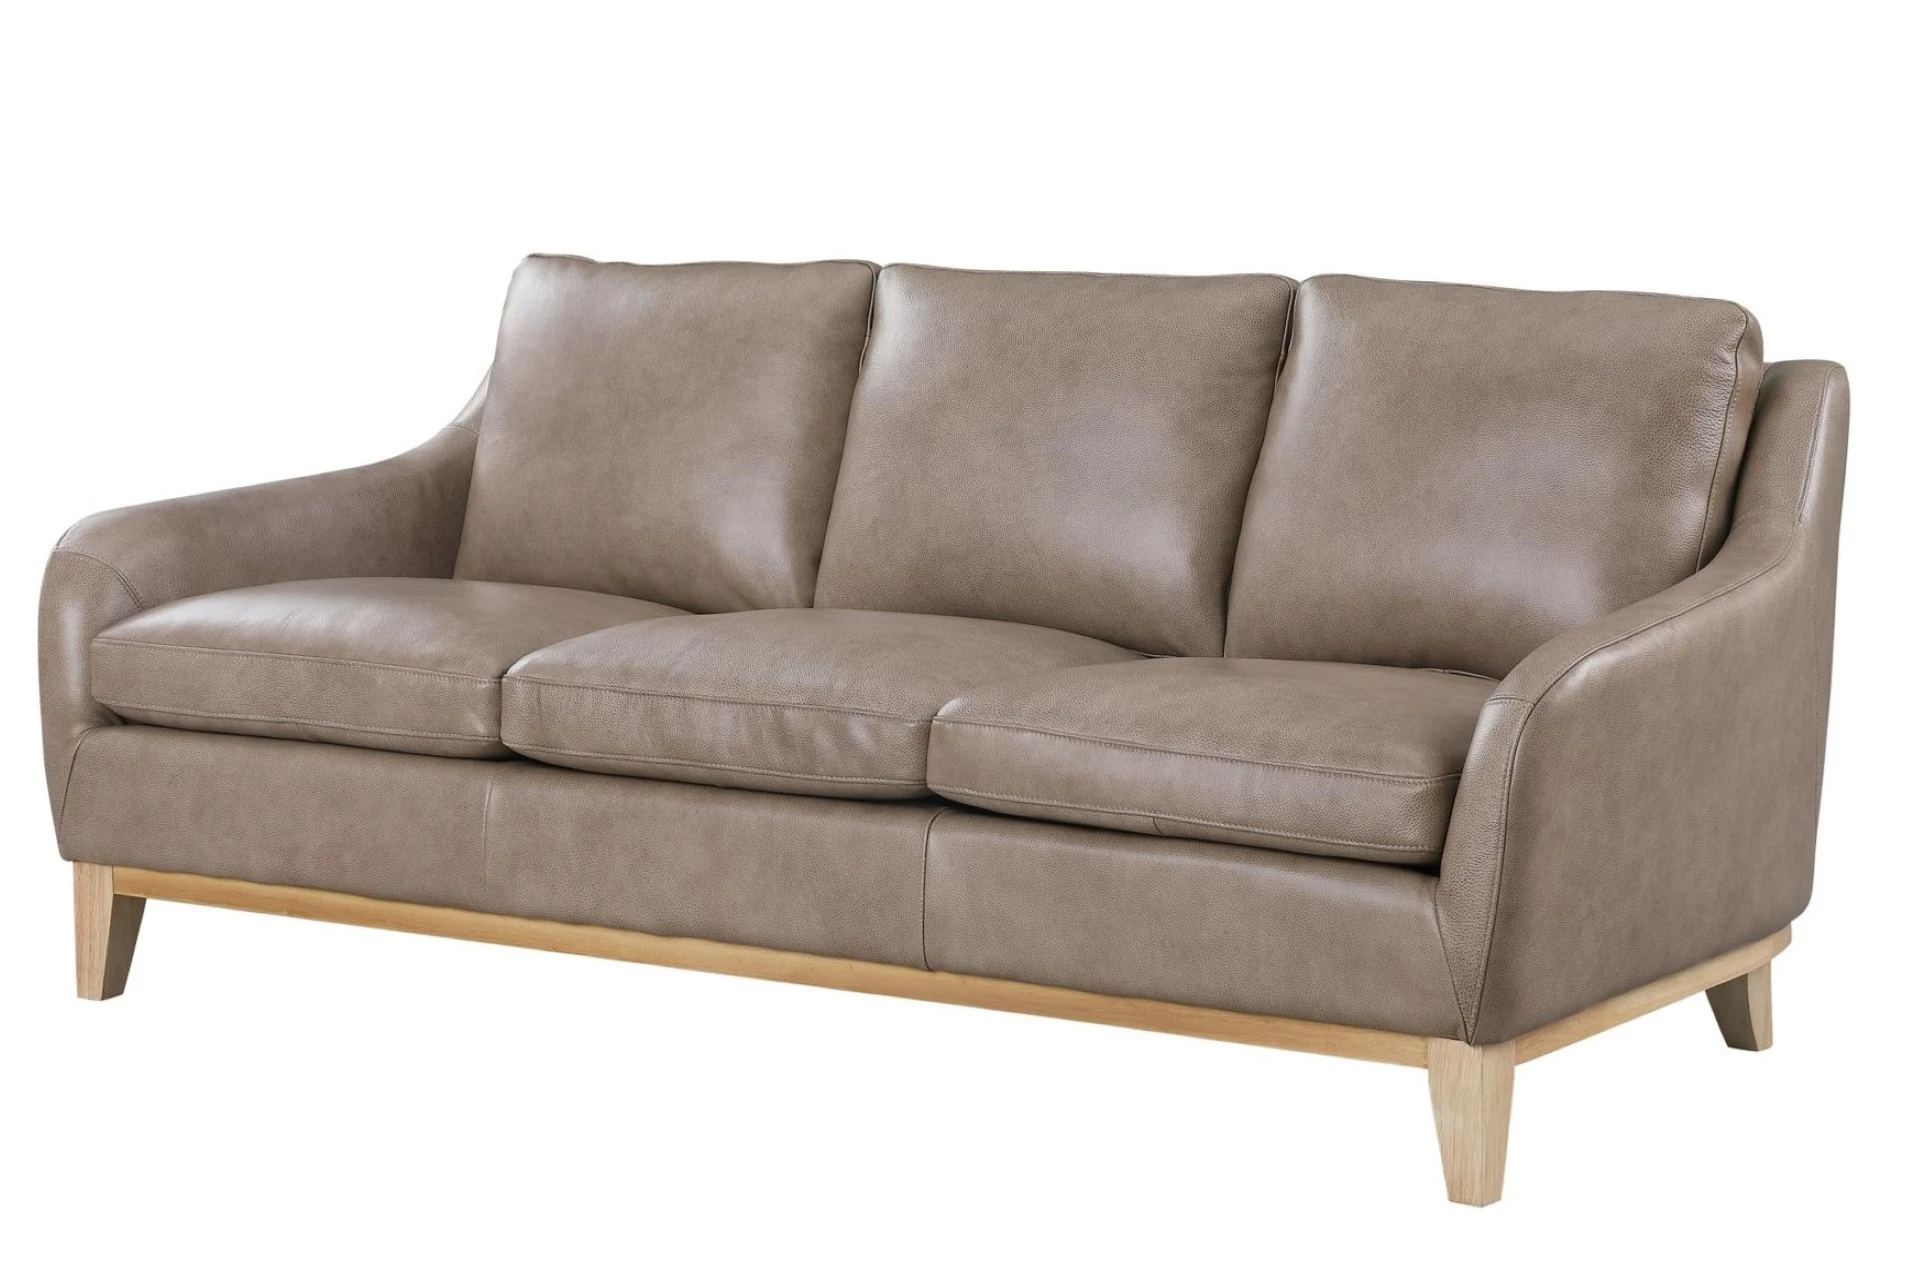 Rider Leather Beige Lawson Sofa With